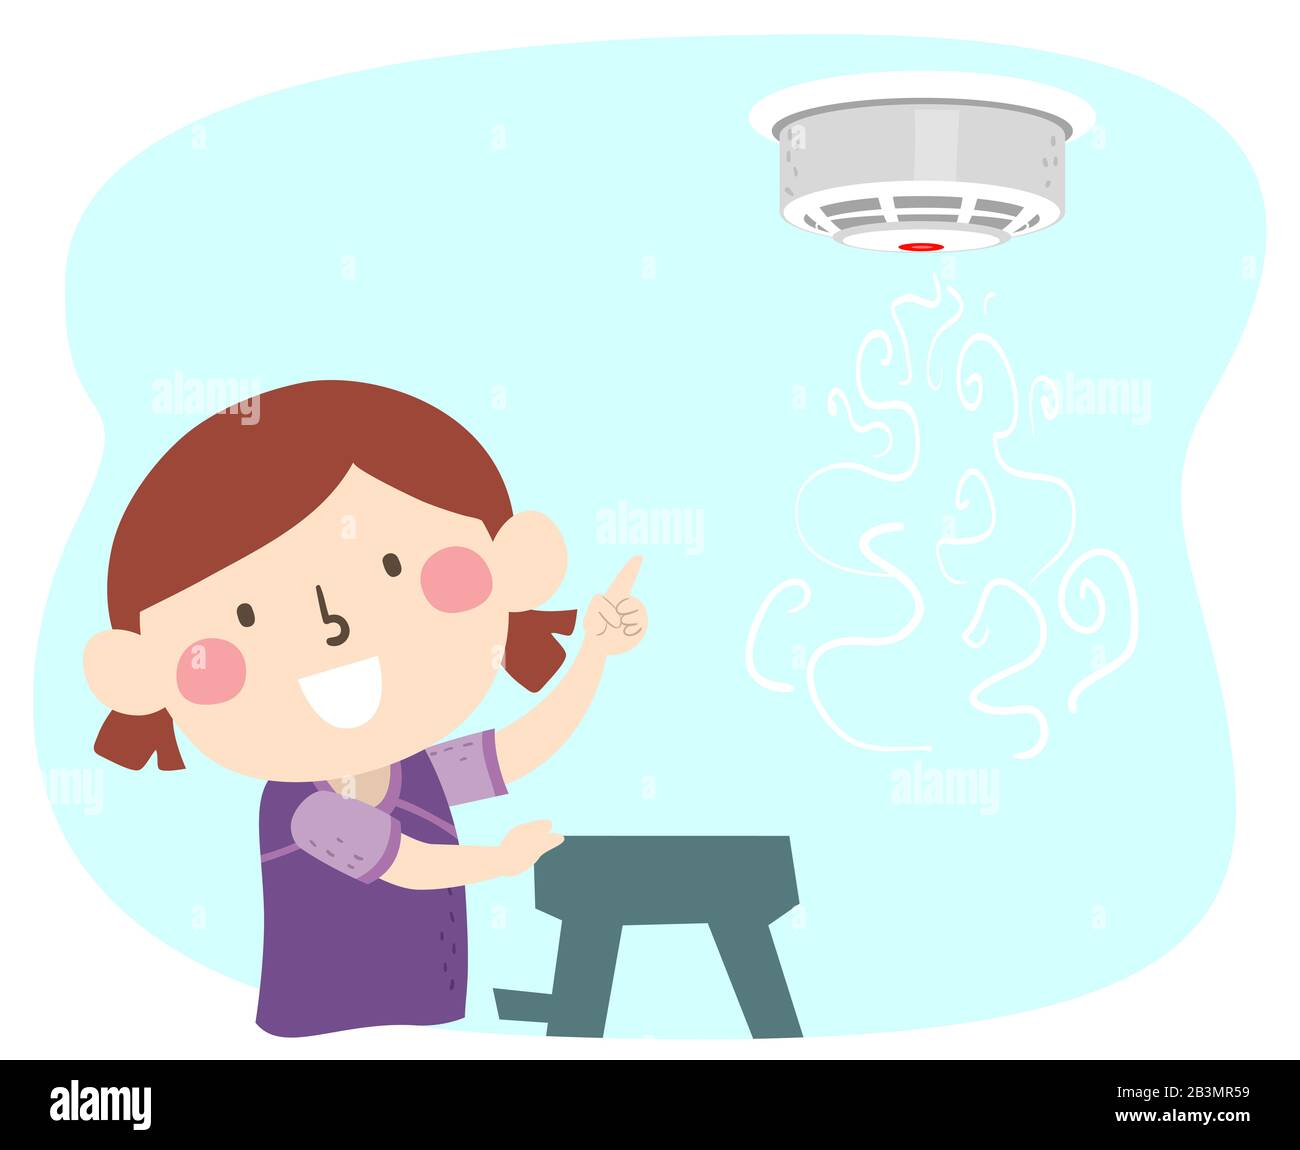 Illustration of a Kid Girl on a Ladder with Smoke Around Her and Pointing to a Smoke Detector Fire Alarm Device on the Ceiling Stock Photo